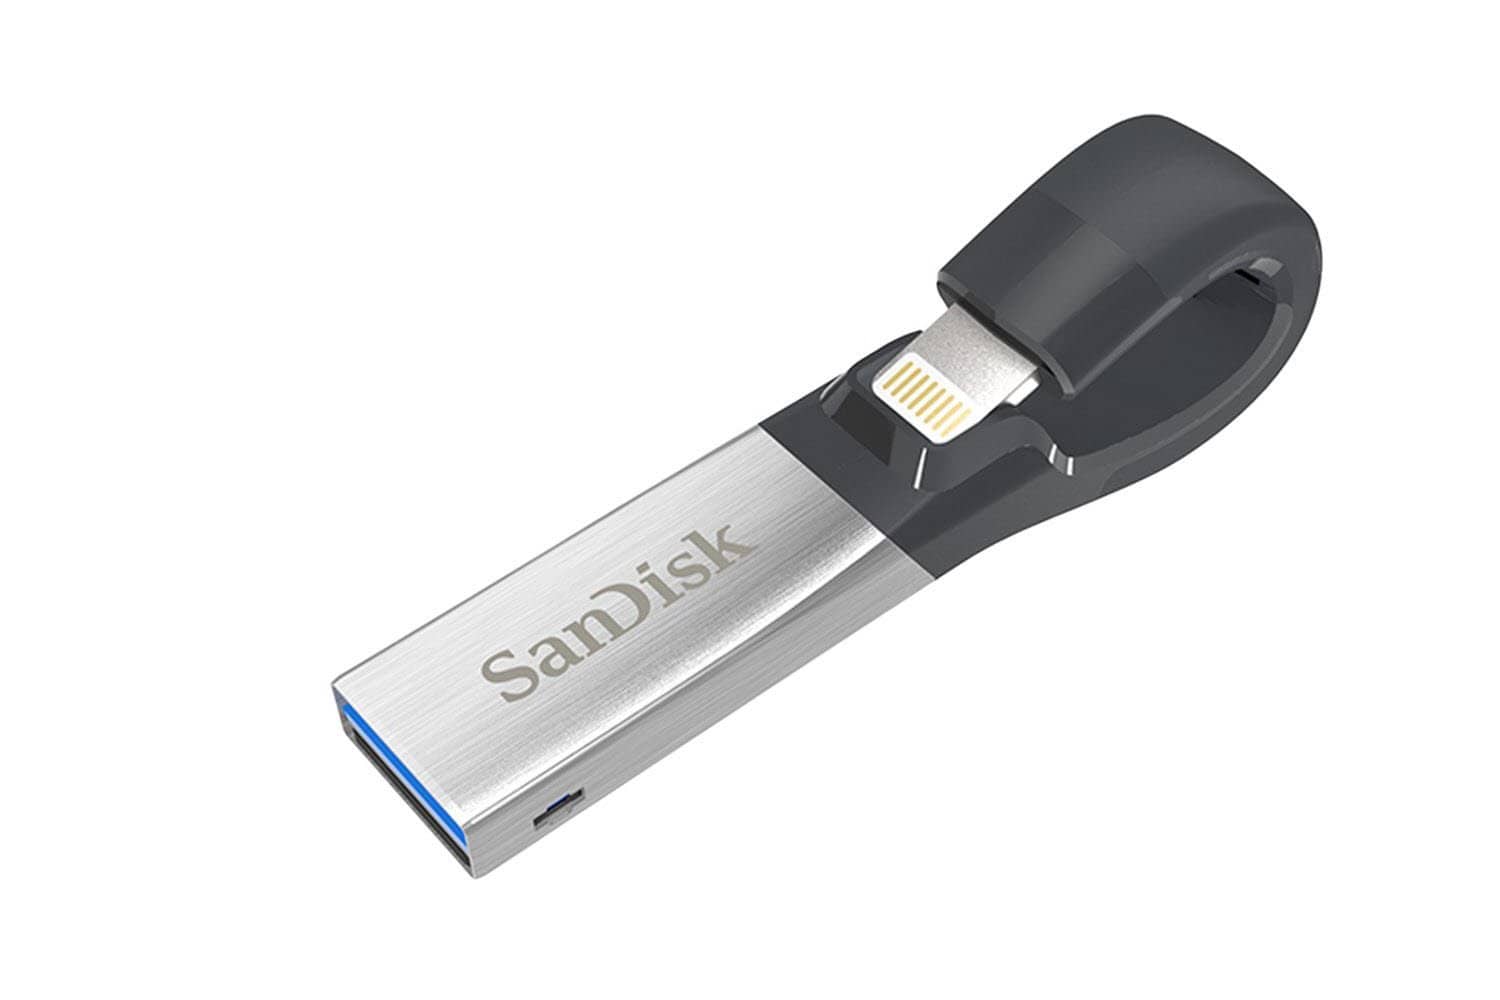 SanDisk iXpand Flash Drive 64GB for iPhone and iPad, Black/Silver